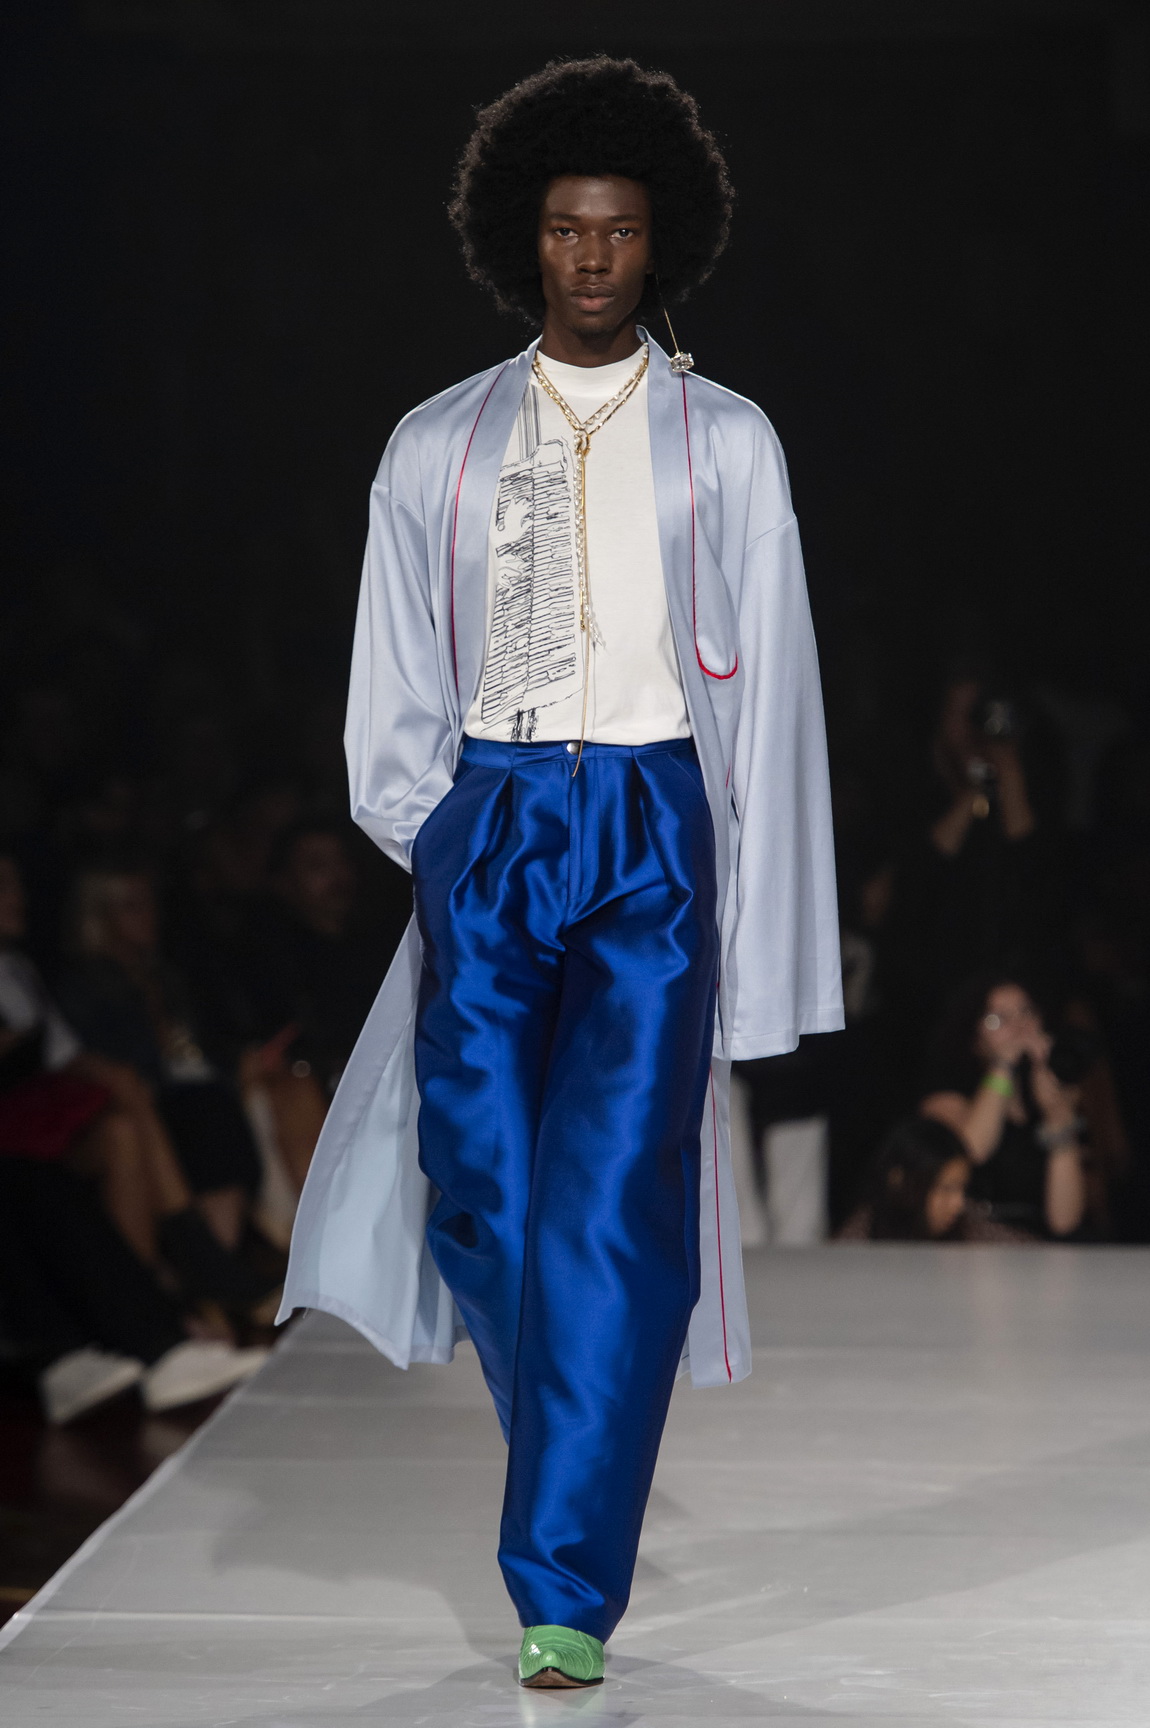 Show Review: Pyer Moss SS20 'Sister' Show Focused on Black